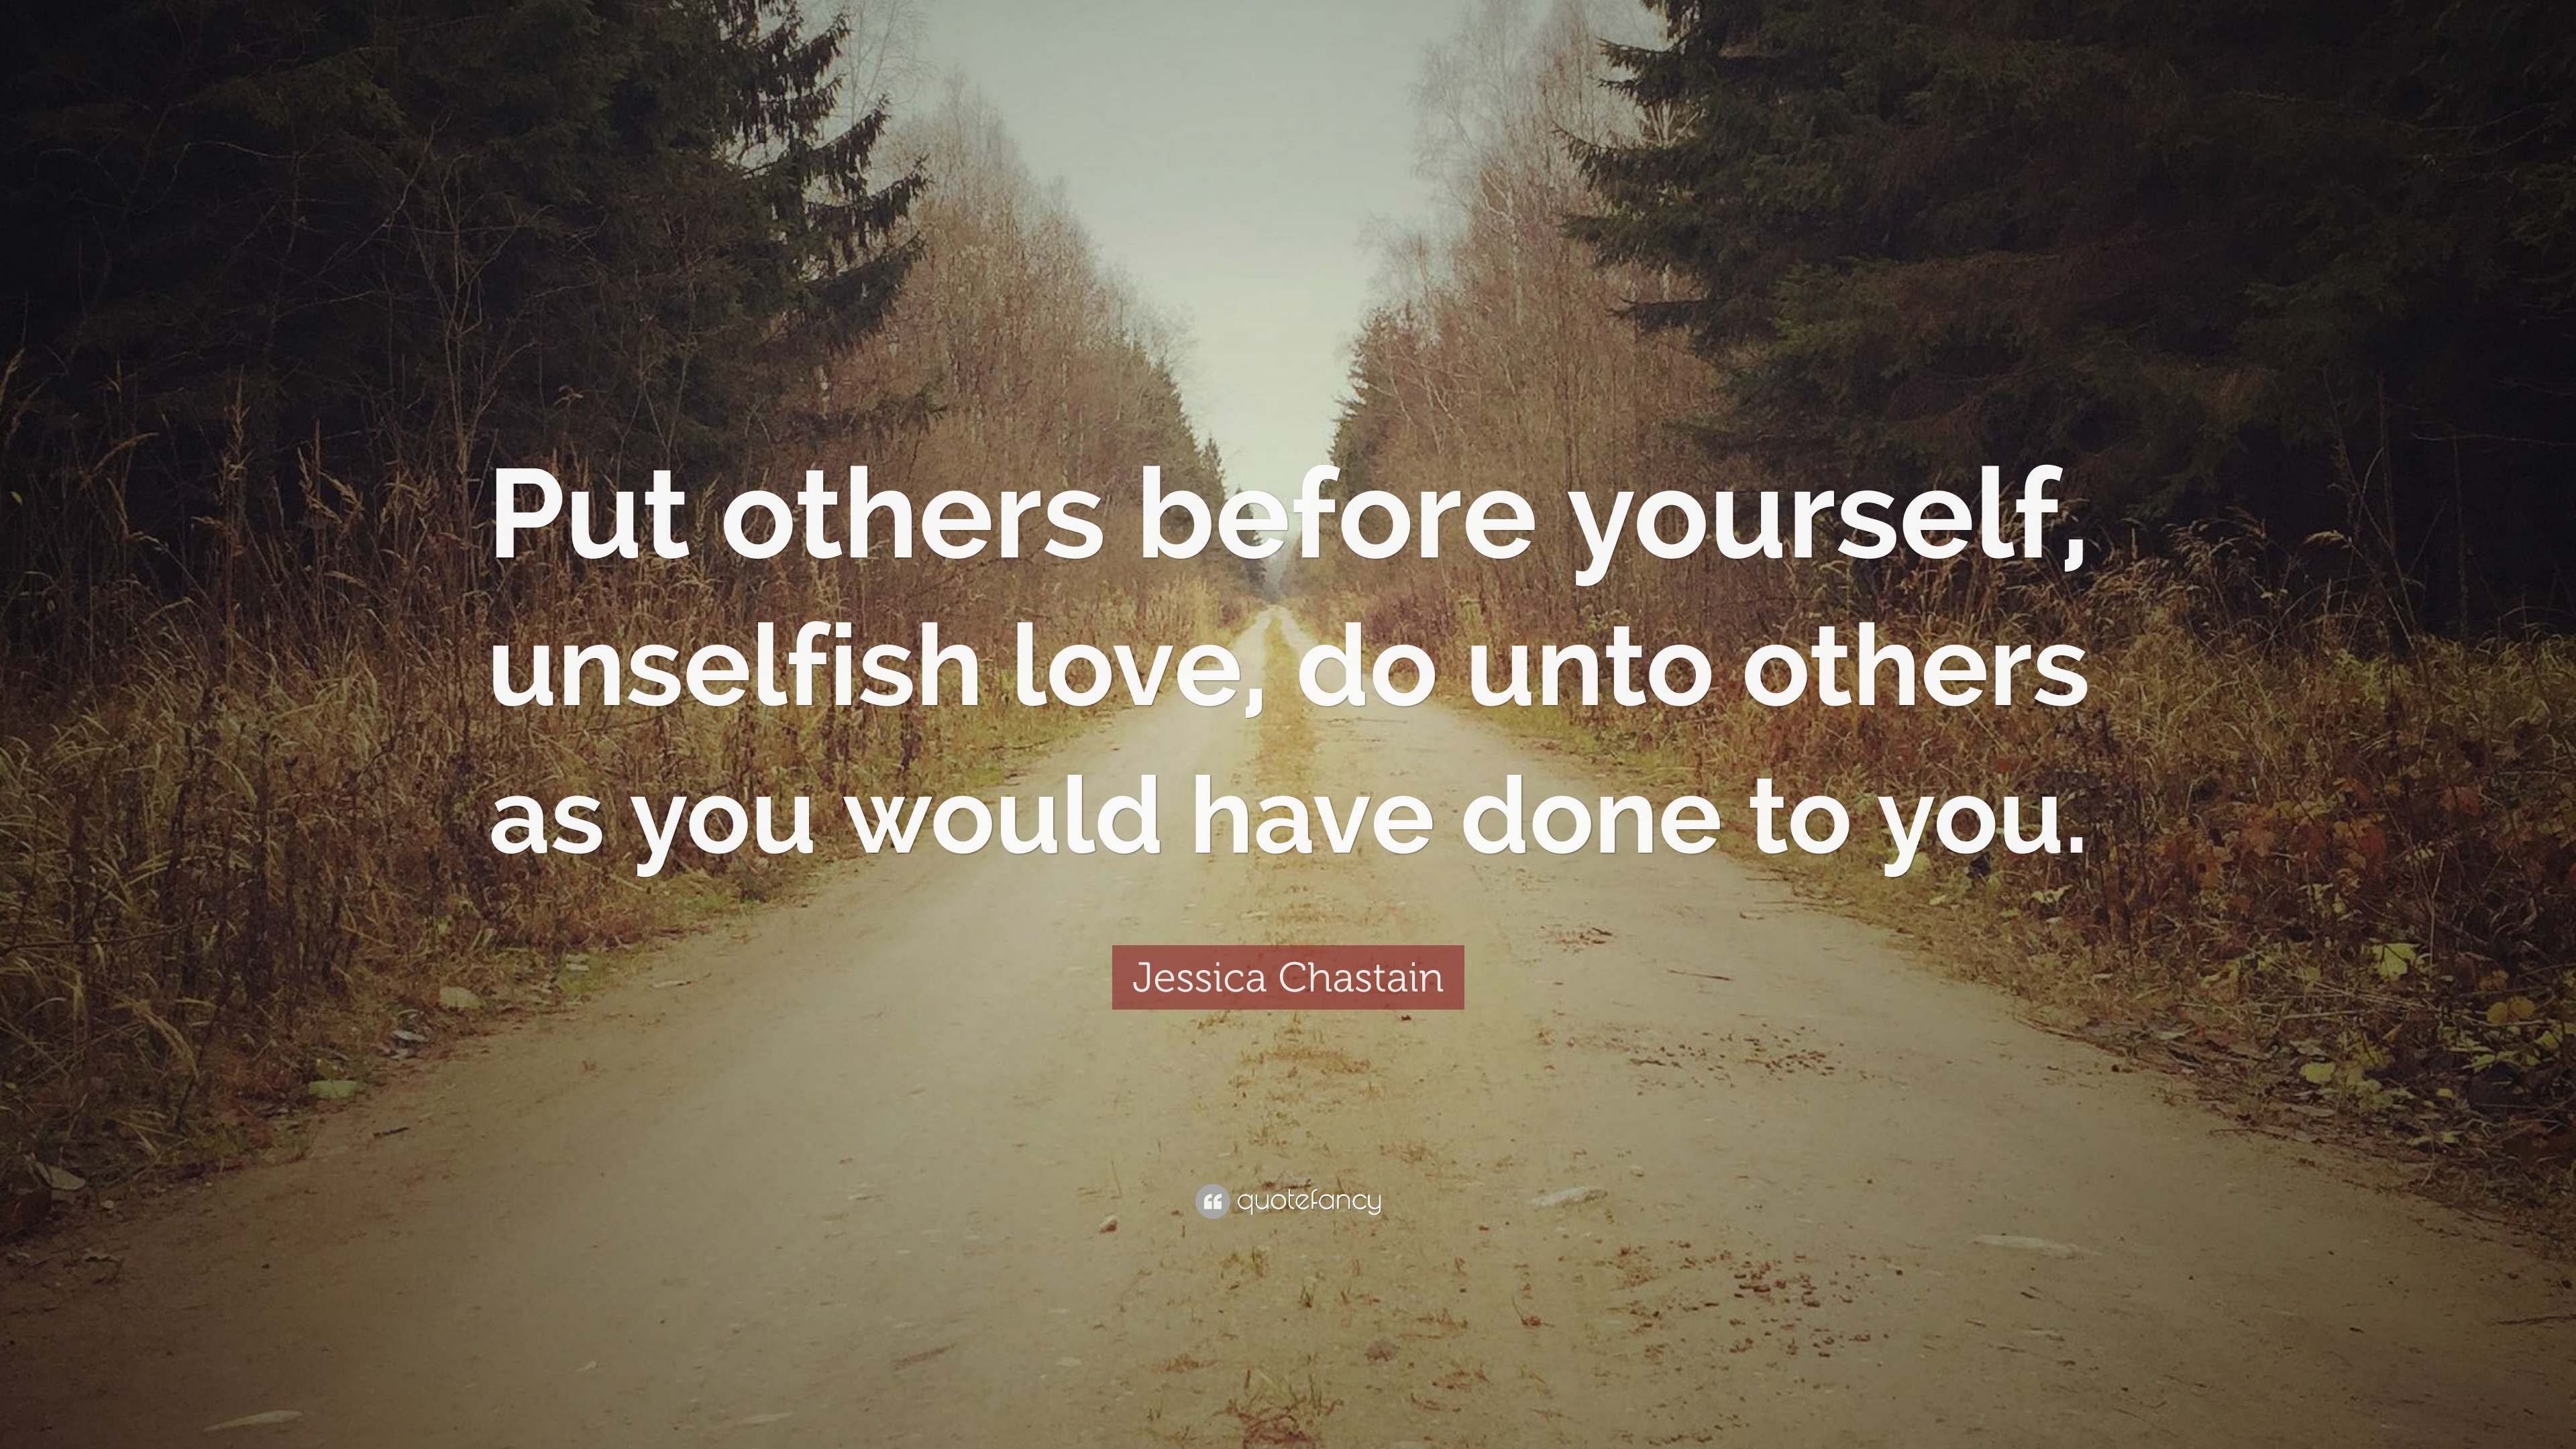 Jessica Chastain Quote: “Put Others Before Yourself, Unselfish Love, Do Unto Others As You Would Have